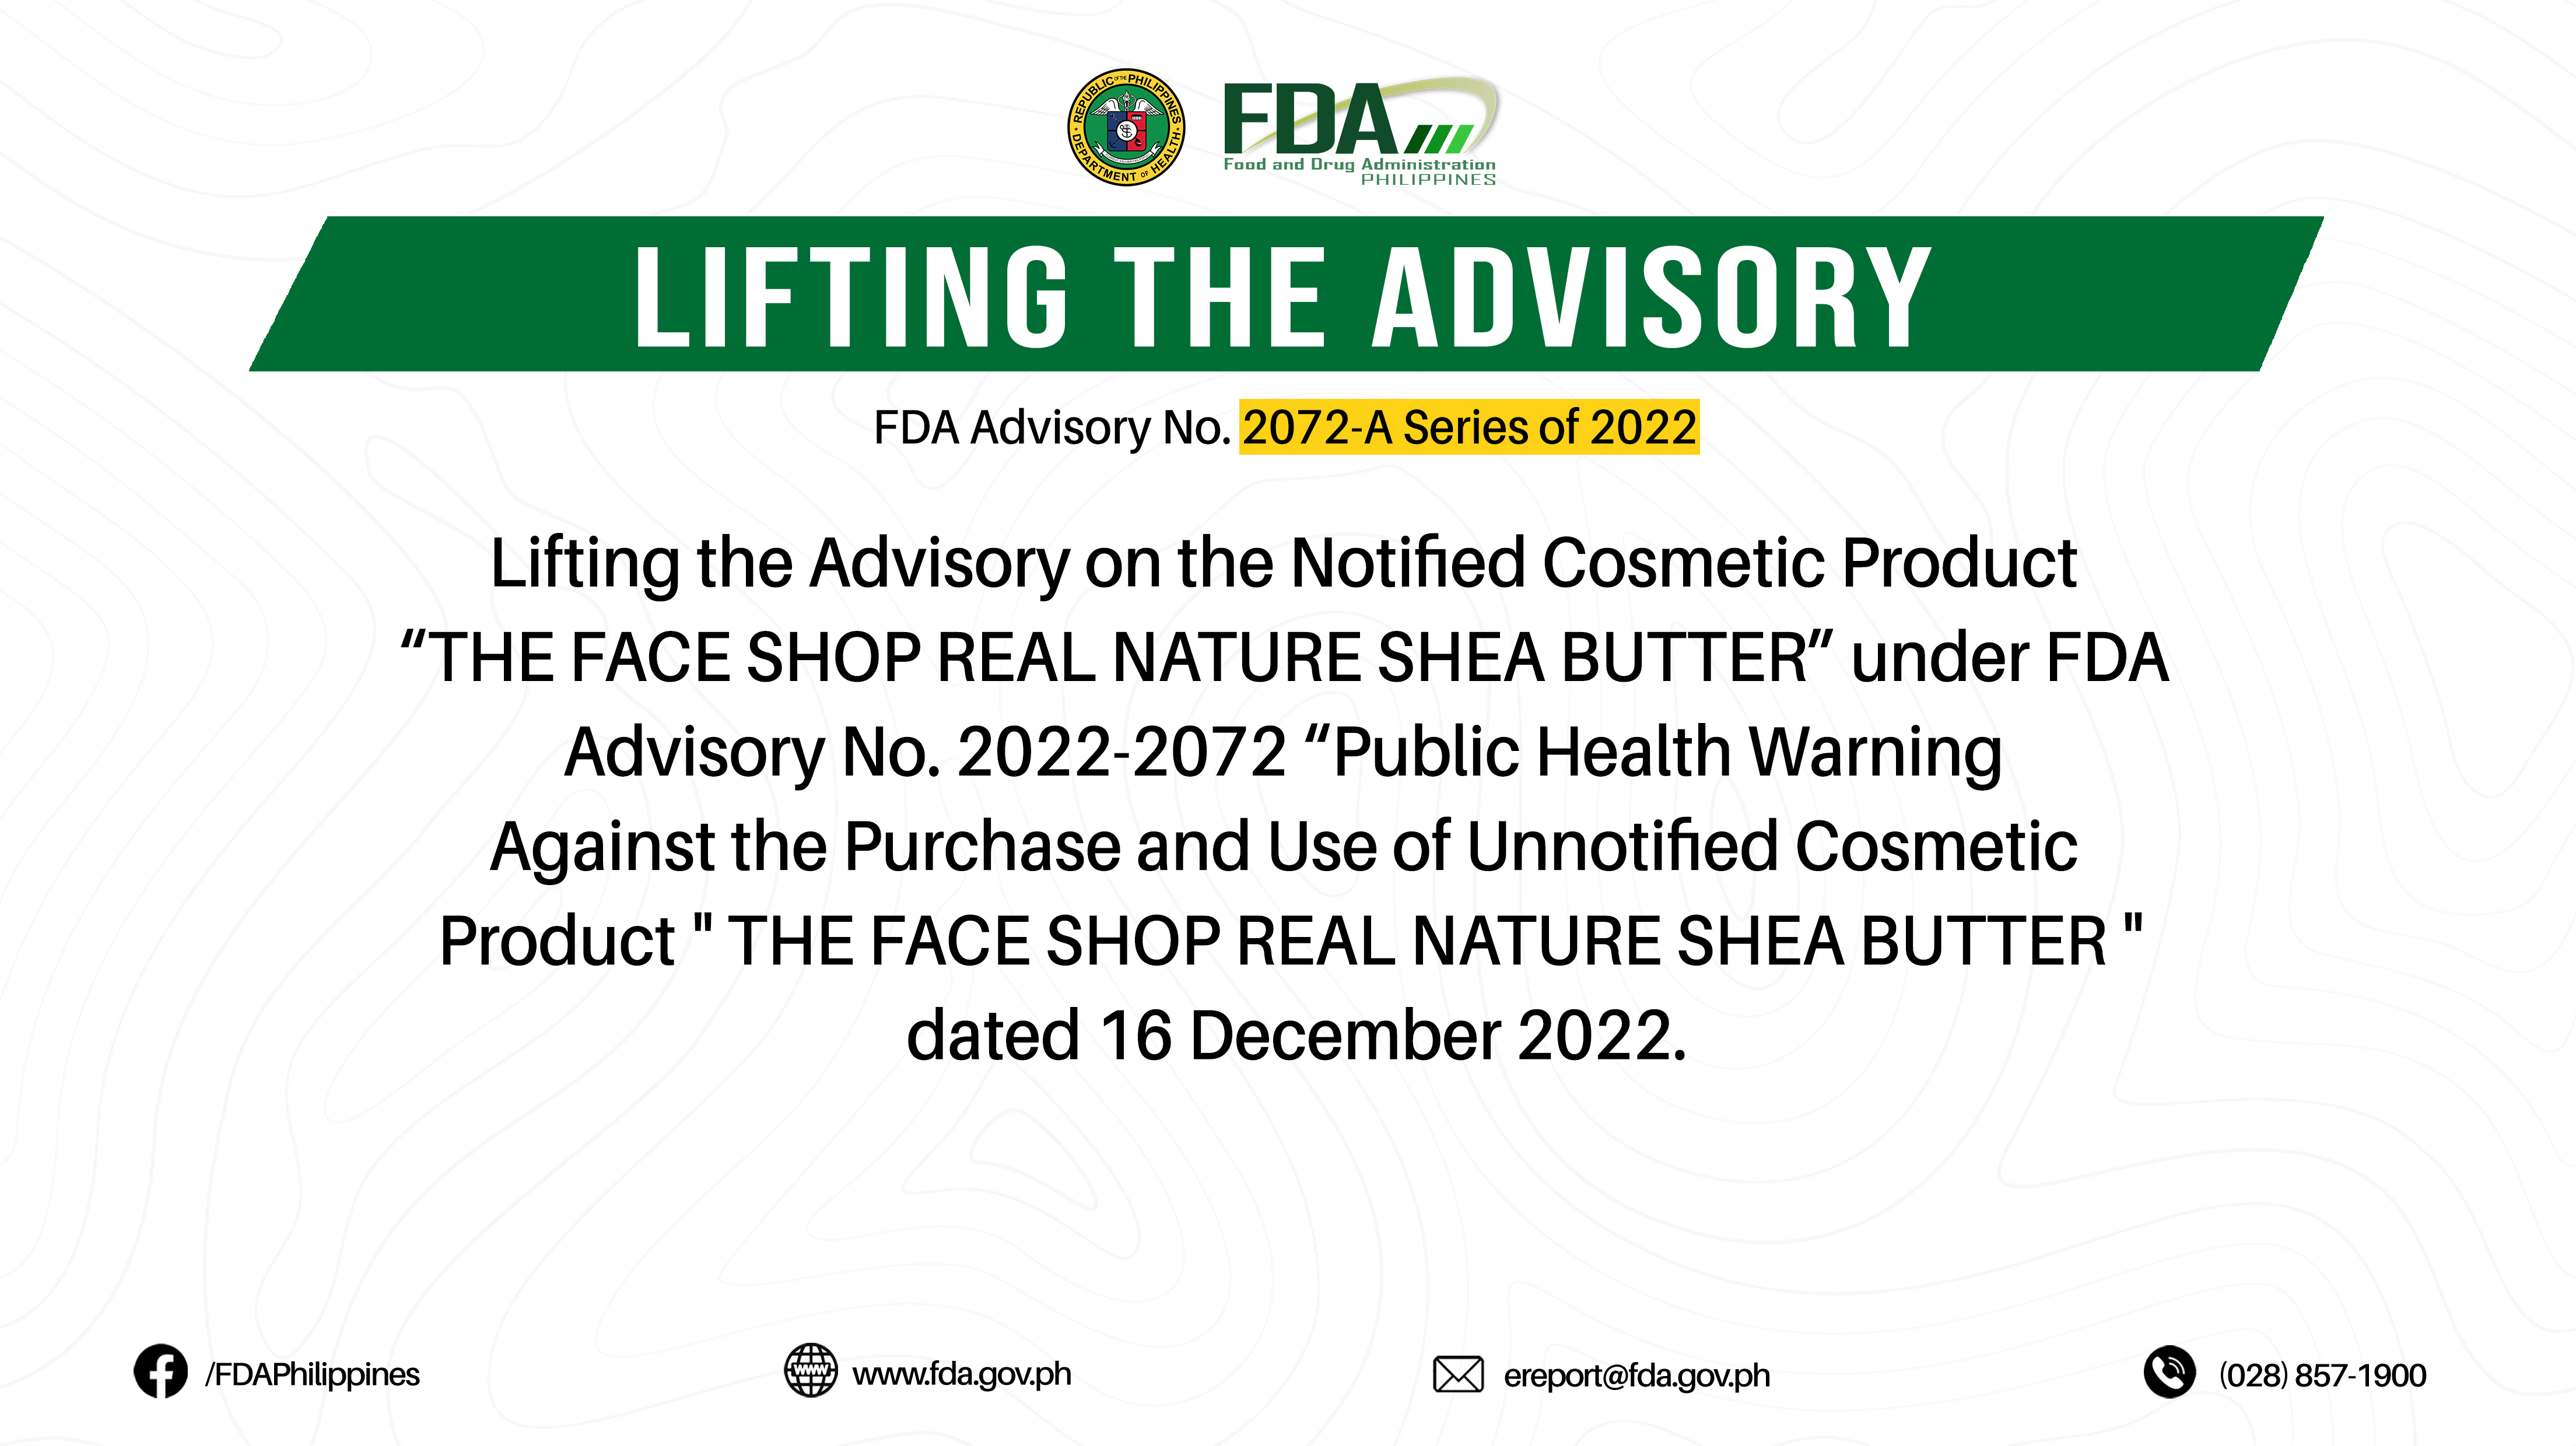 FDA Advisory No.2022-2072-A || Lifting the Advisory on the Notified Cosmetic Product “THE FACE SHOP REAL NATURE SHEA BUTTER” under FDA Advisory No. 2022-2072 “Public Health Warning Against the Purchase and Use of Unnotified Cosmetic Product ” THE FACE SHOP REAL NATURE SHEA BUTTER ” dated 16 December 2022.